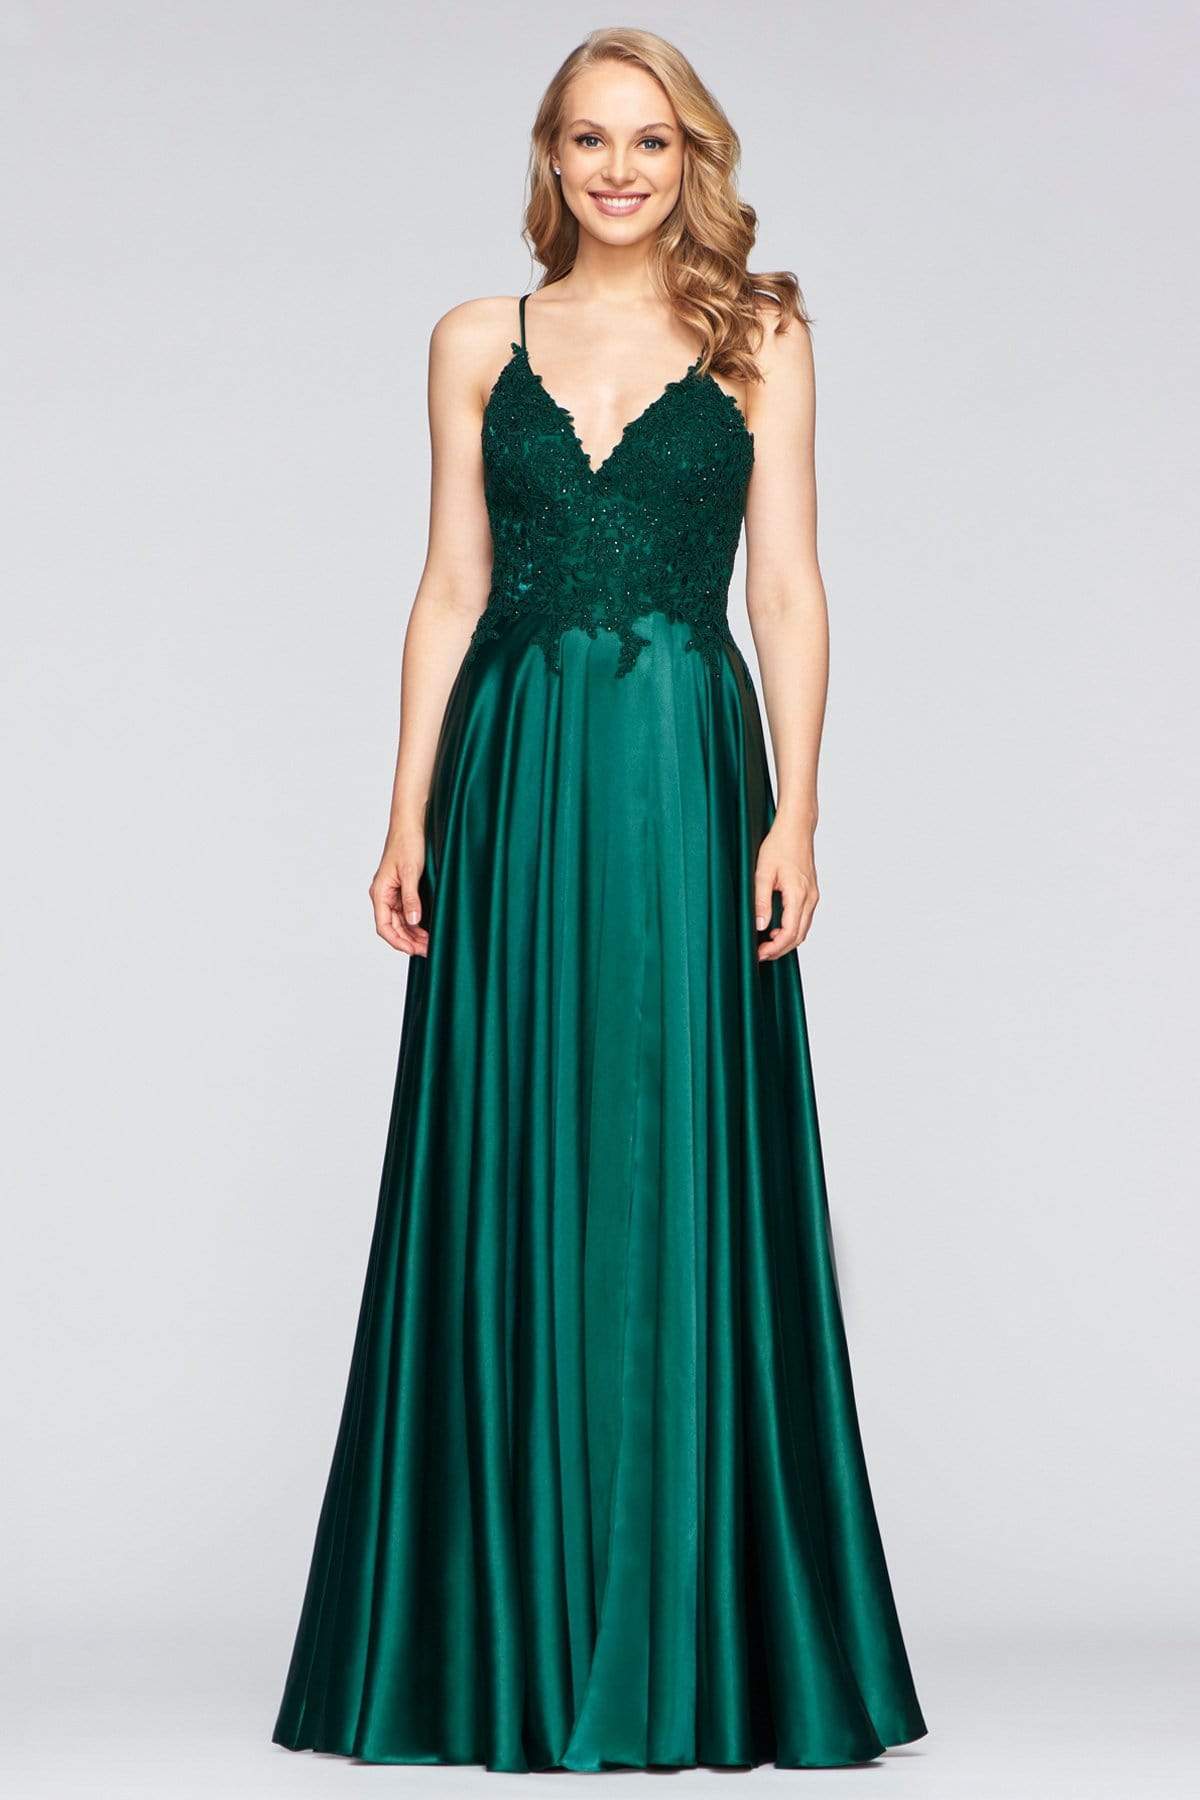 Image of Faviana - S10400 Beaded Lace V Neck Flowy Satin Gown